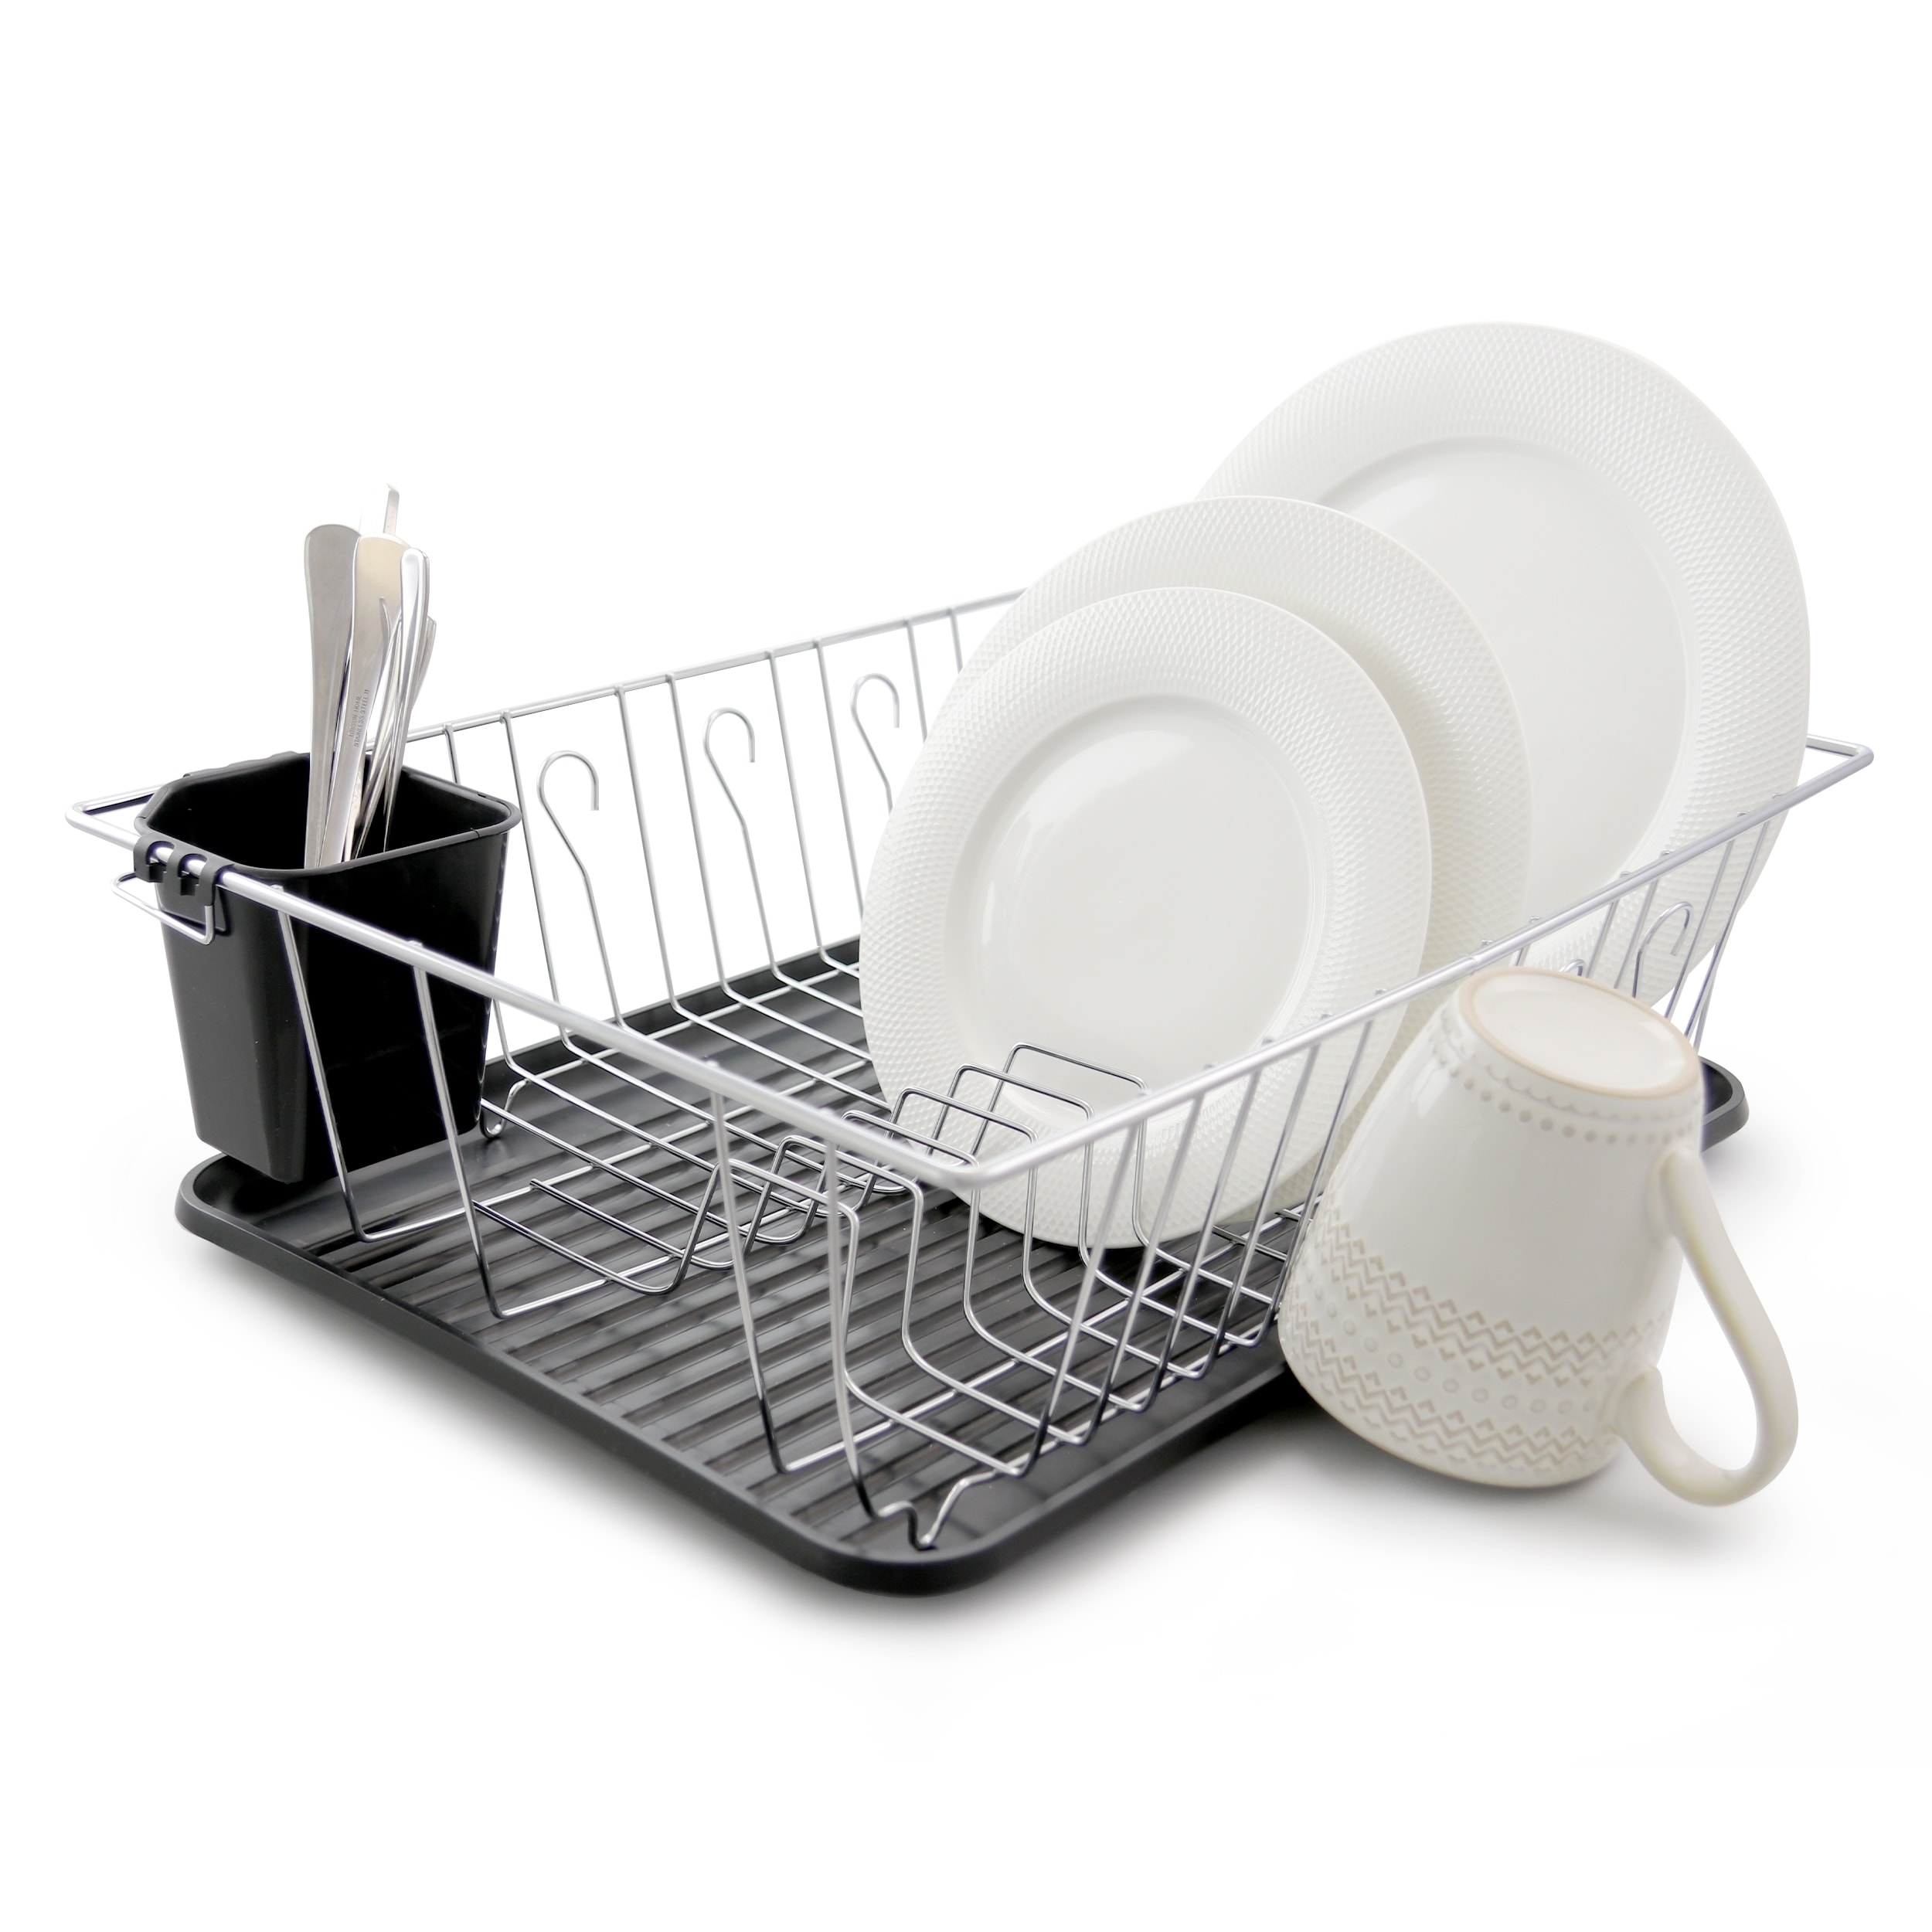 SONGMICS Dish Drying Rack, Stainless Steel Dish Rack with Rotatable Spout, Drainboard, Dish Drainers for Kitchen Counter, Silver and Gray